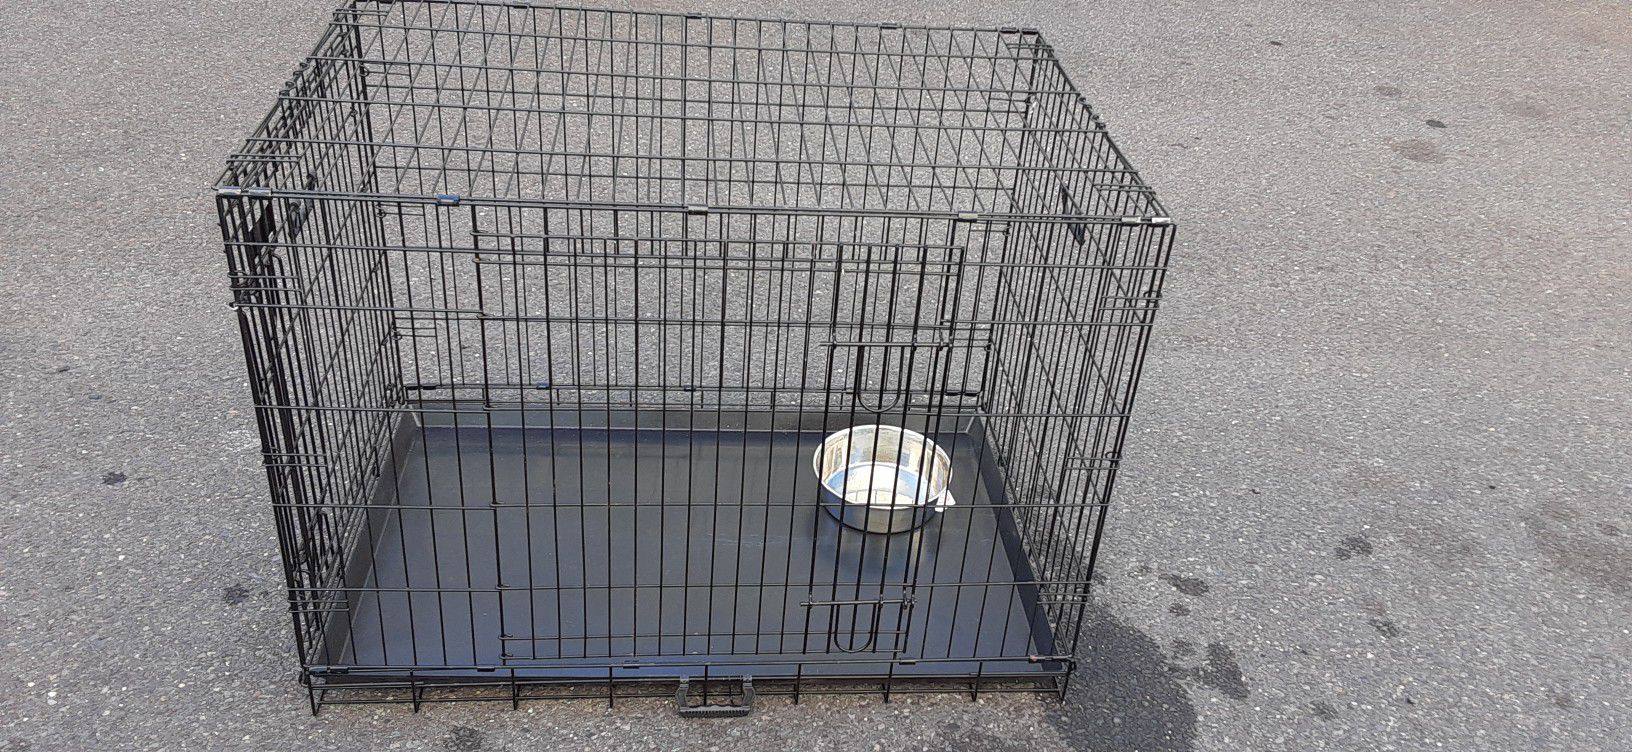 Extra large dog Crate/Cage includes double doors and bottom changing tray safe reliable and ready for immediate use pickup curbside delivery available